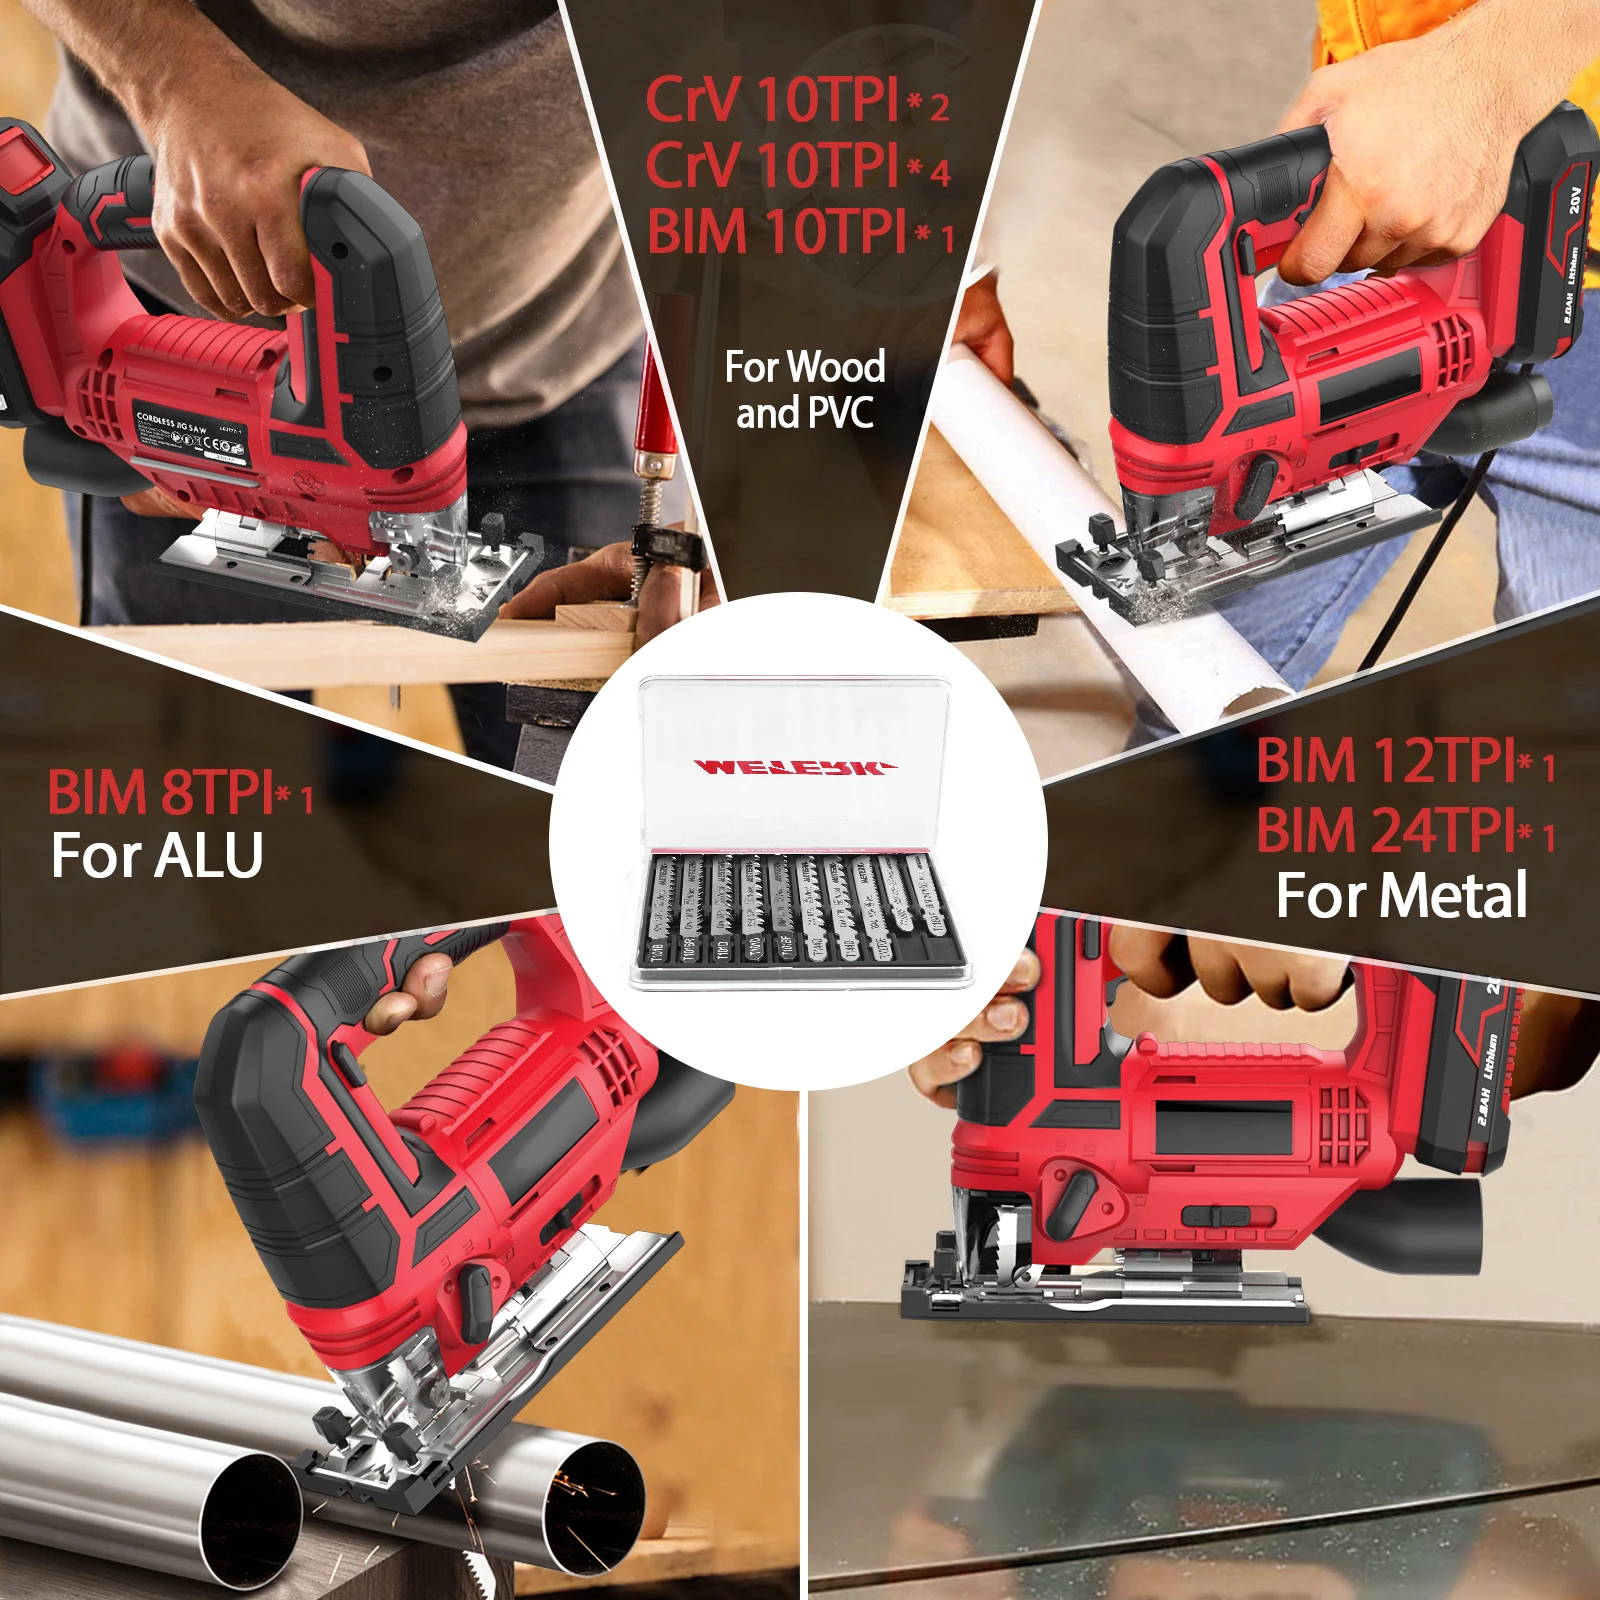 https://ae01.alicdn.com/kf/S1d0d0f088ace4a9784ec61b4a9bb179c1/Jig-Saw-20V-Cordless-Jigsaw-for-Woodworking-with-4-Orbital-Settings-2700-SPM-10-Piece-T.jpg